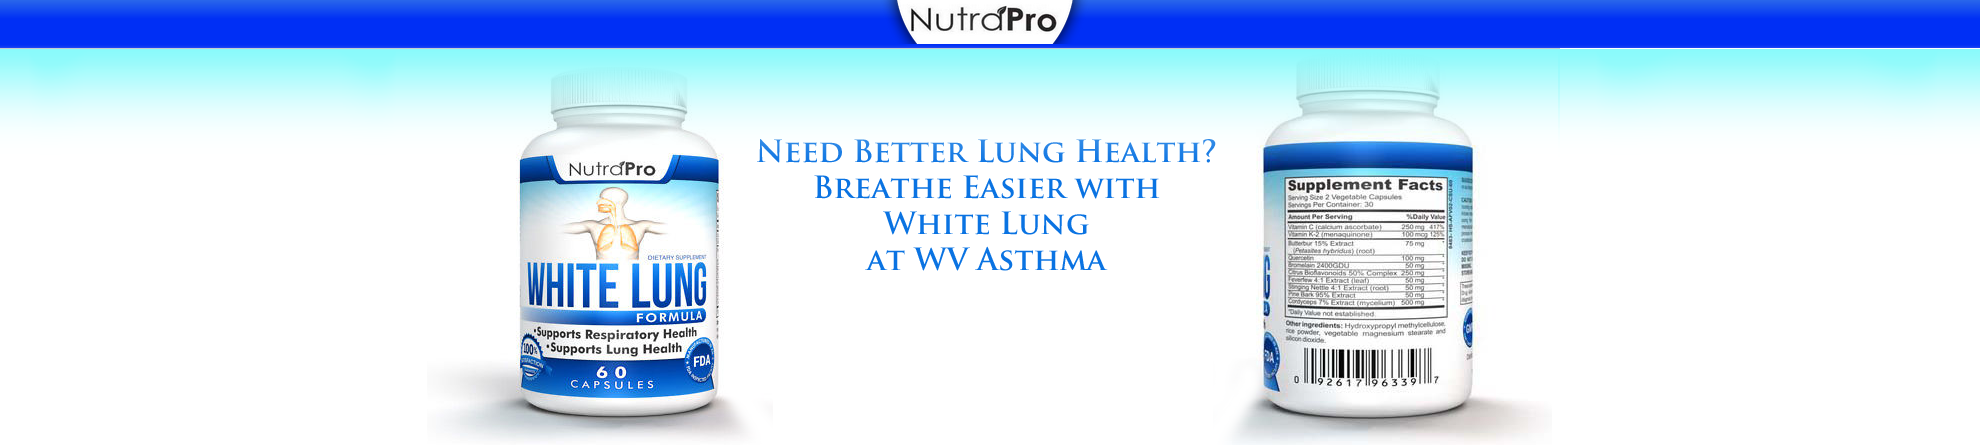 White Lung by NutraPro